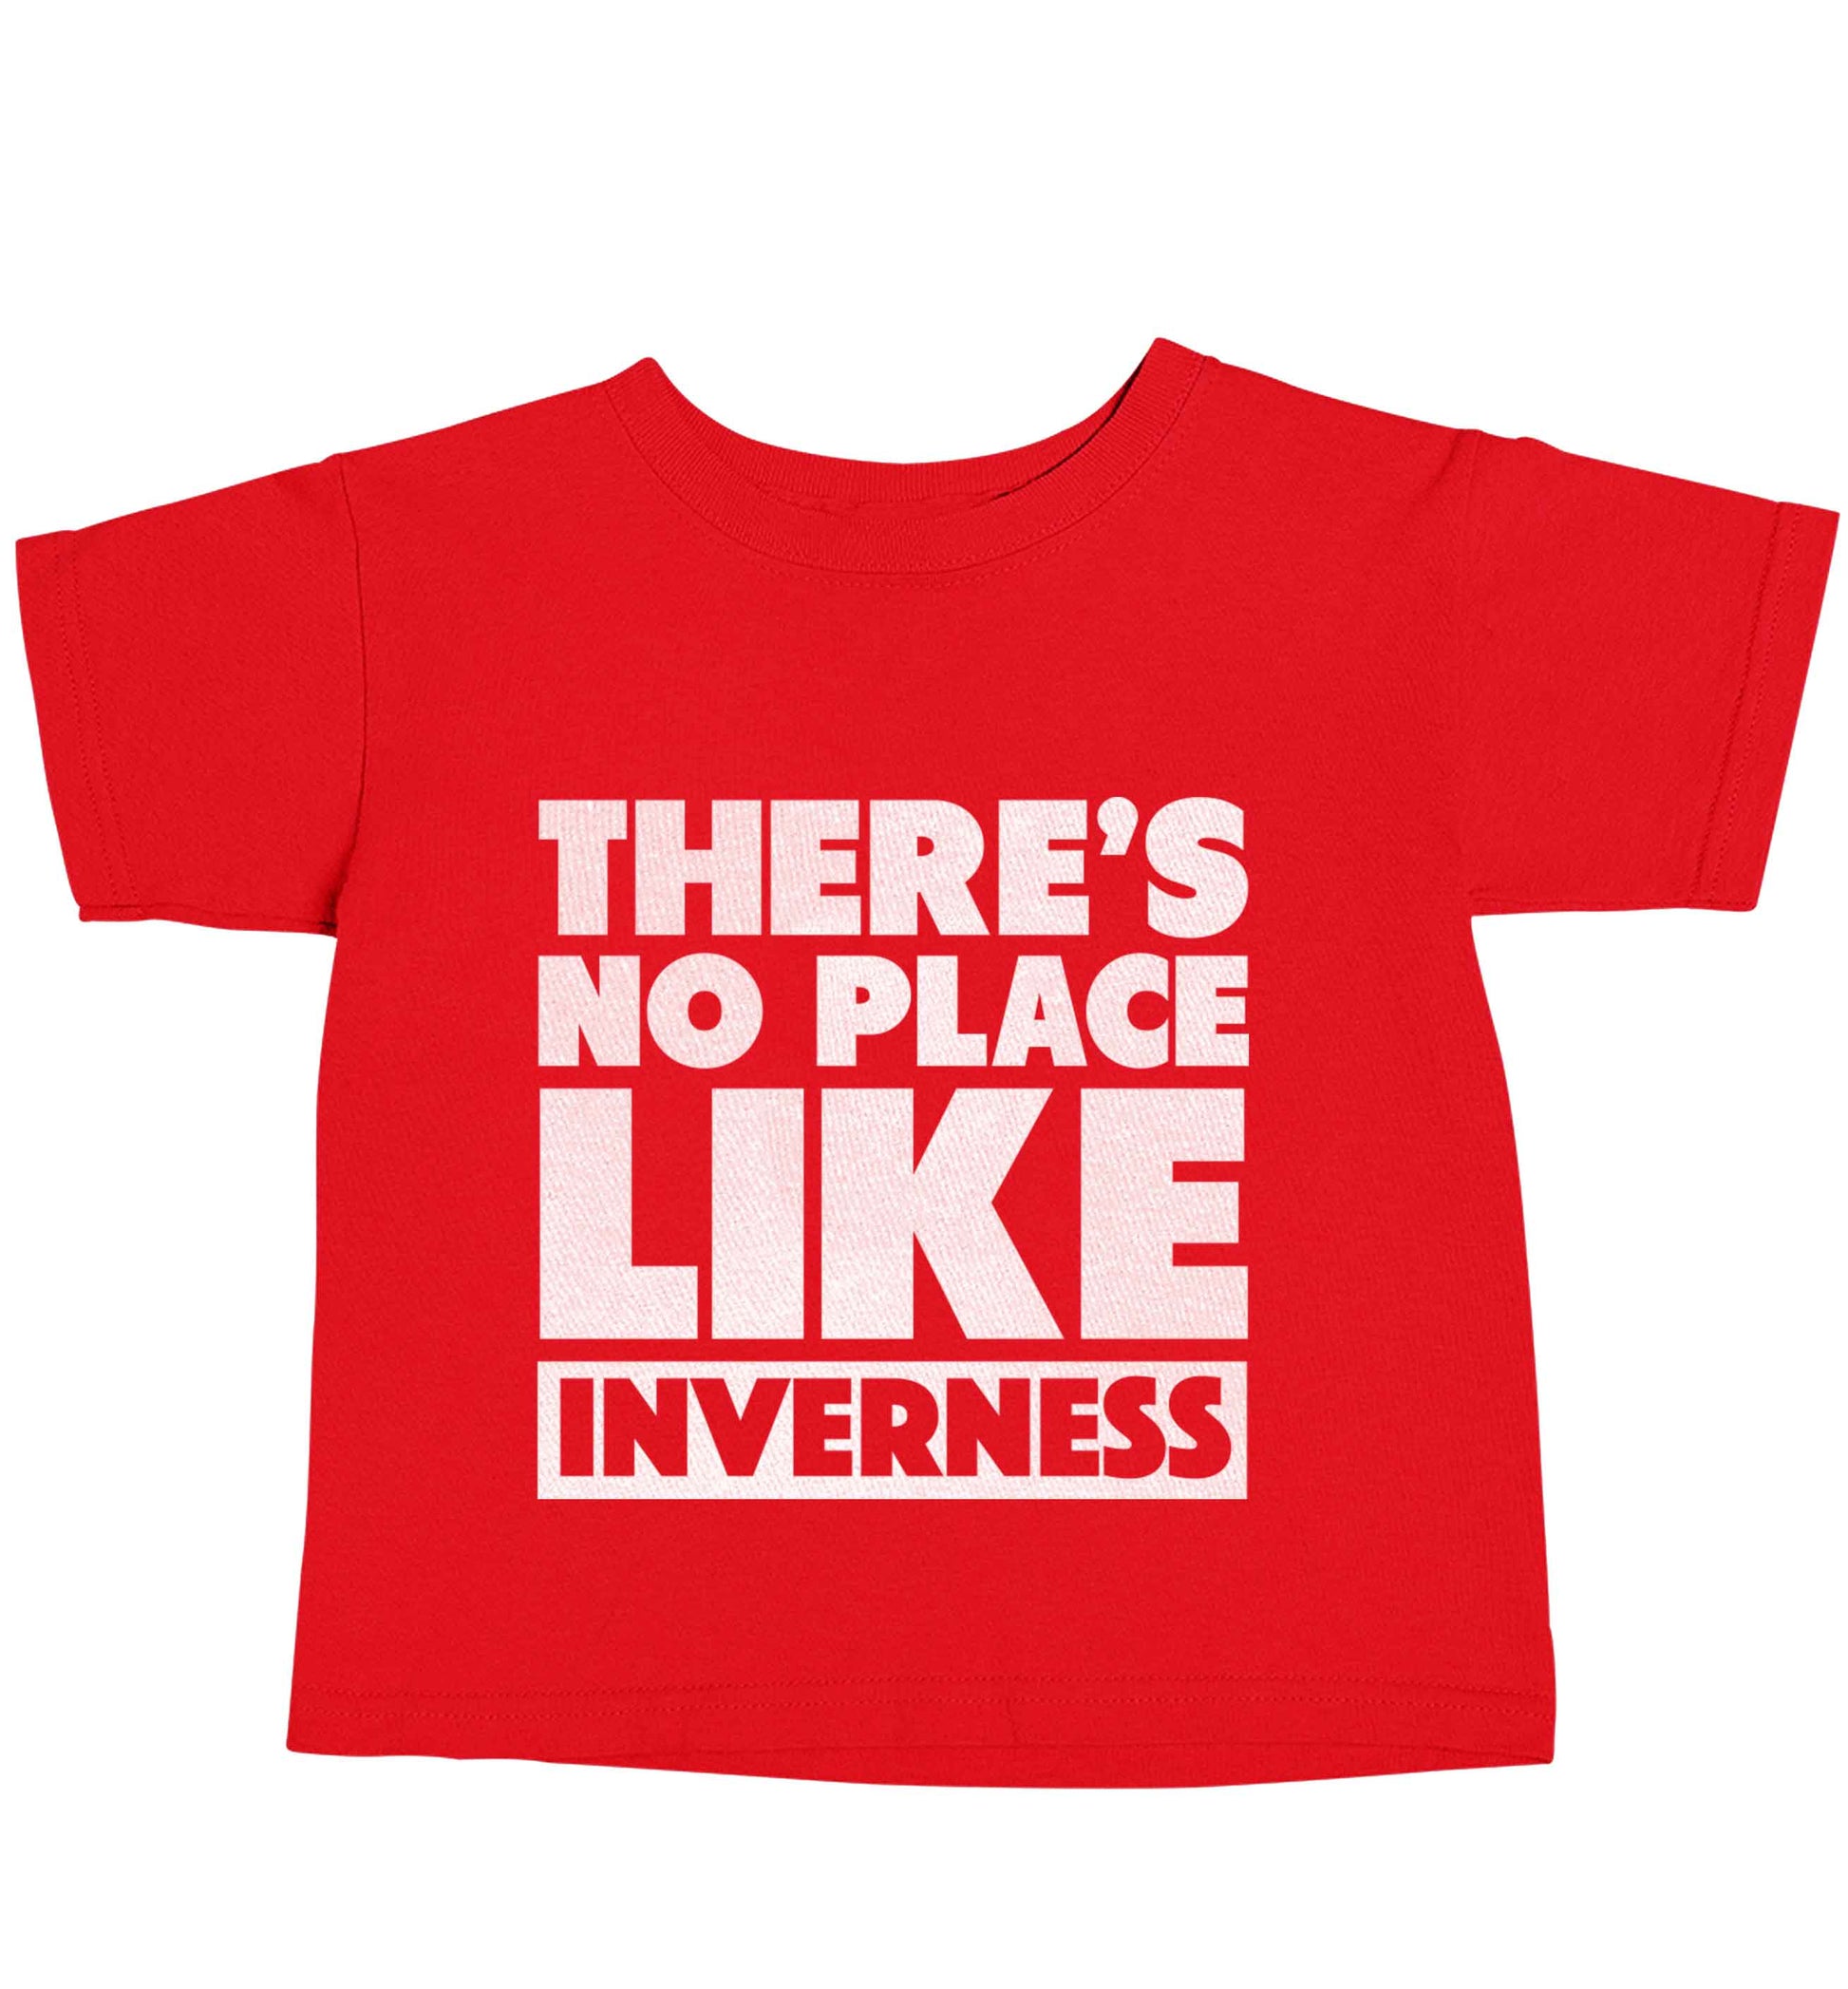 There's no place like Inverness red baby toddler Tshirt 2 Years